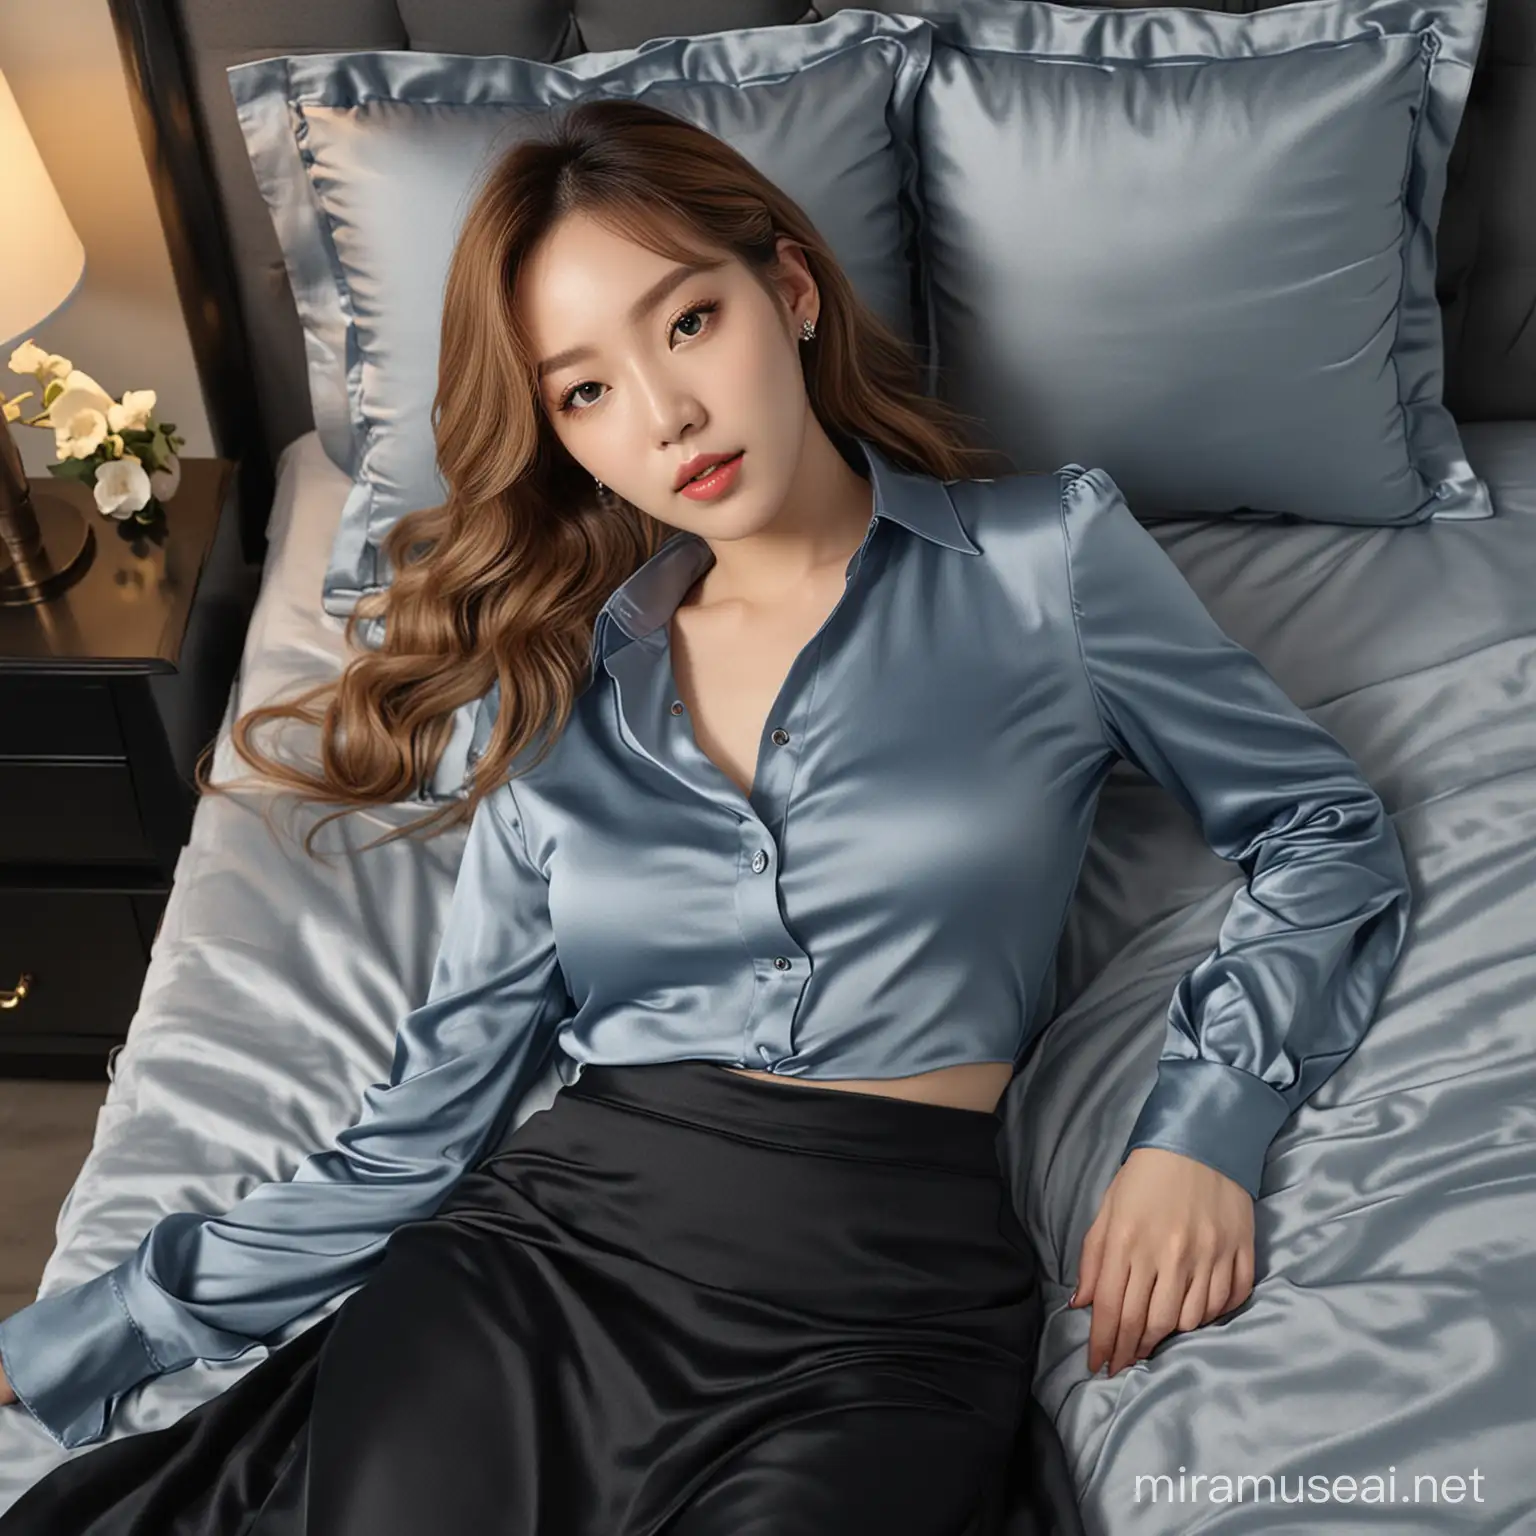 Seductive Woman Lying on Satin Bed in Blue Grey Satin Blouse and Black Midi Skirt